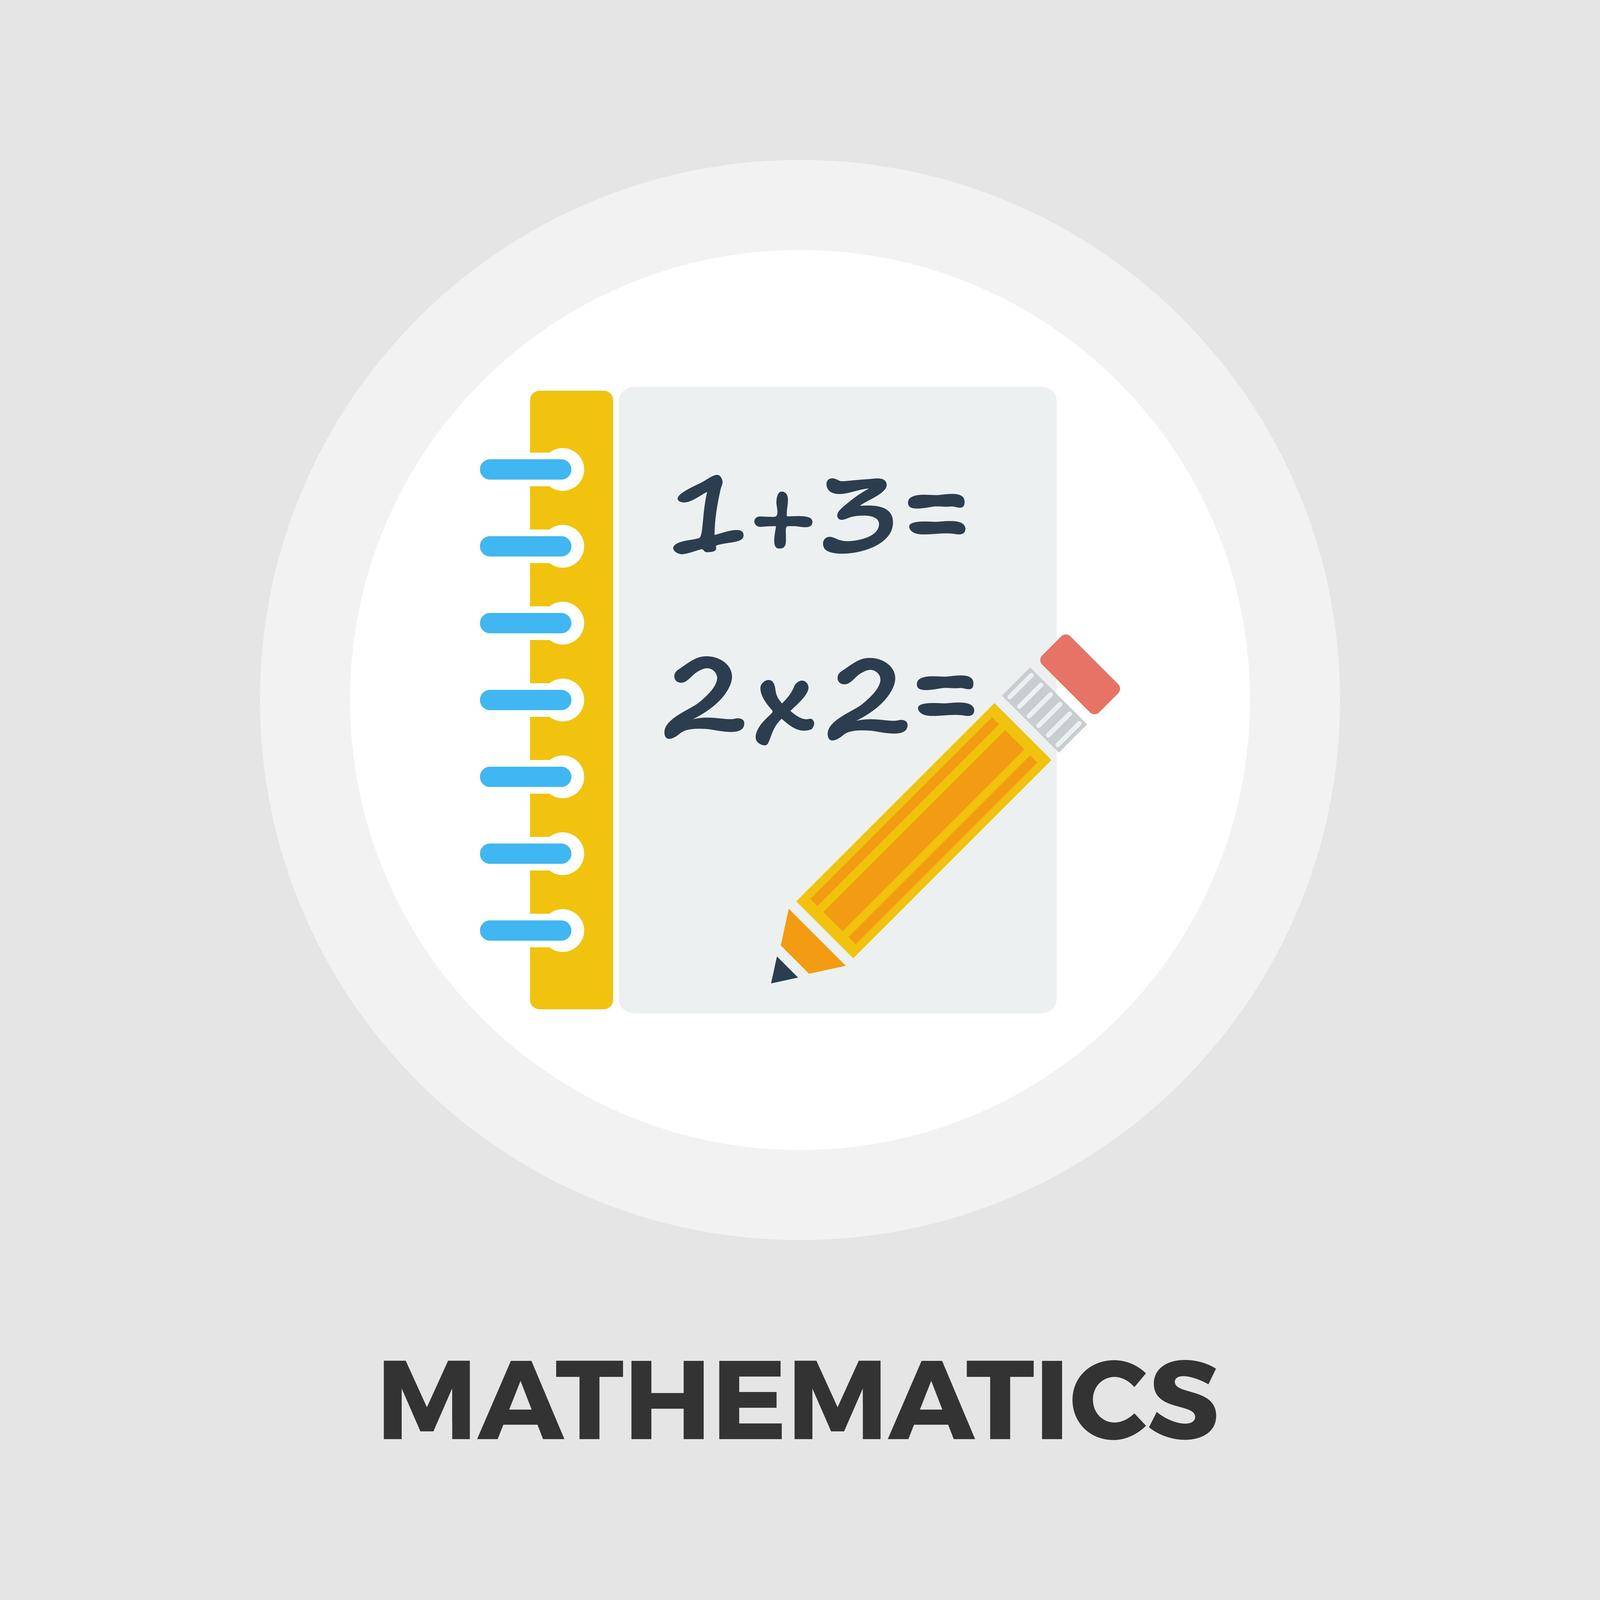 Mathematics icon vector. Flat icon isolated on the white background. Editable EPS file. Vector illustration.